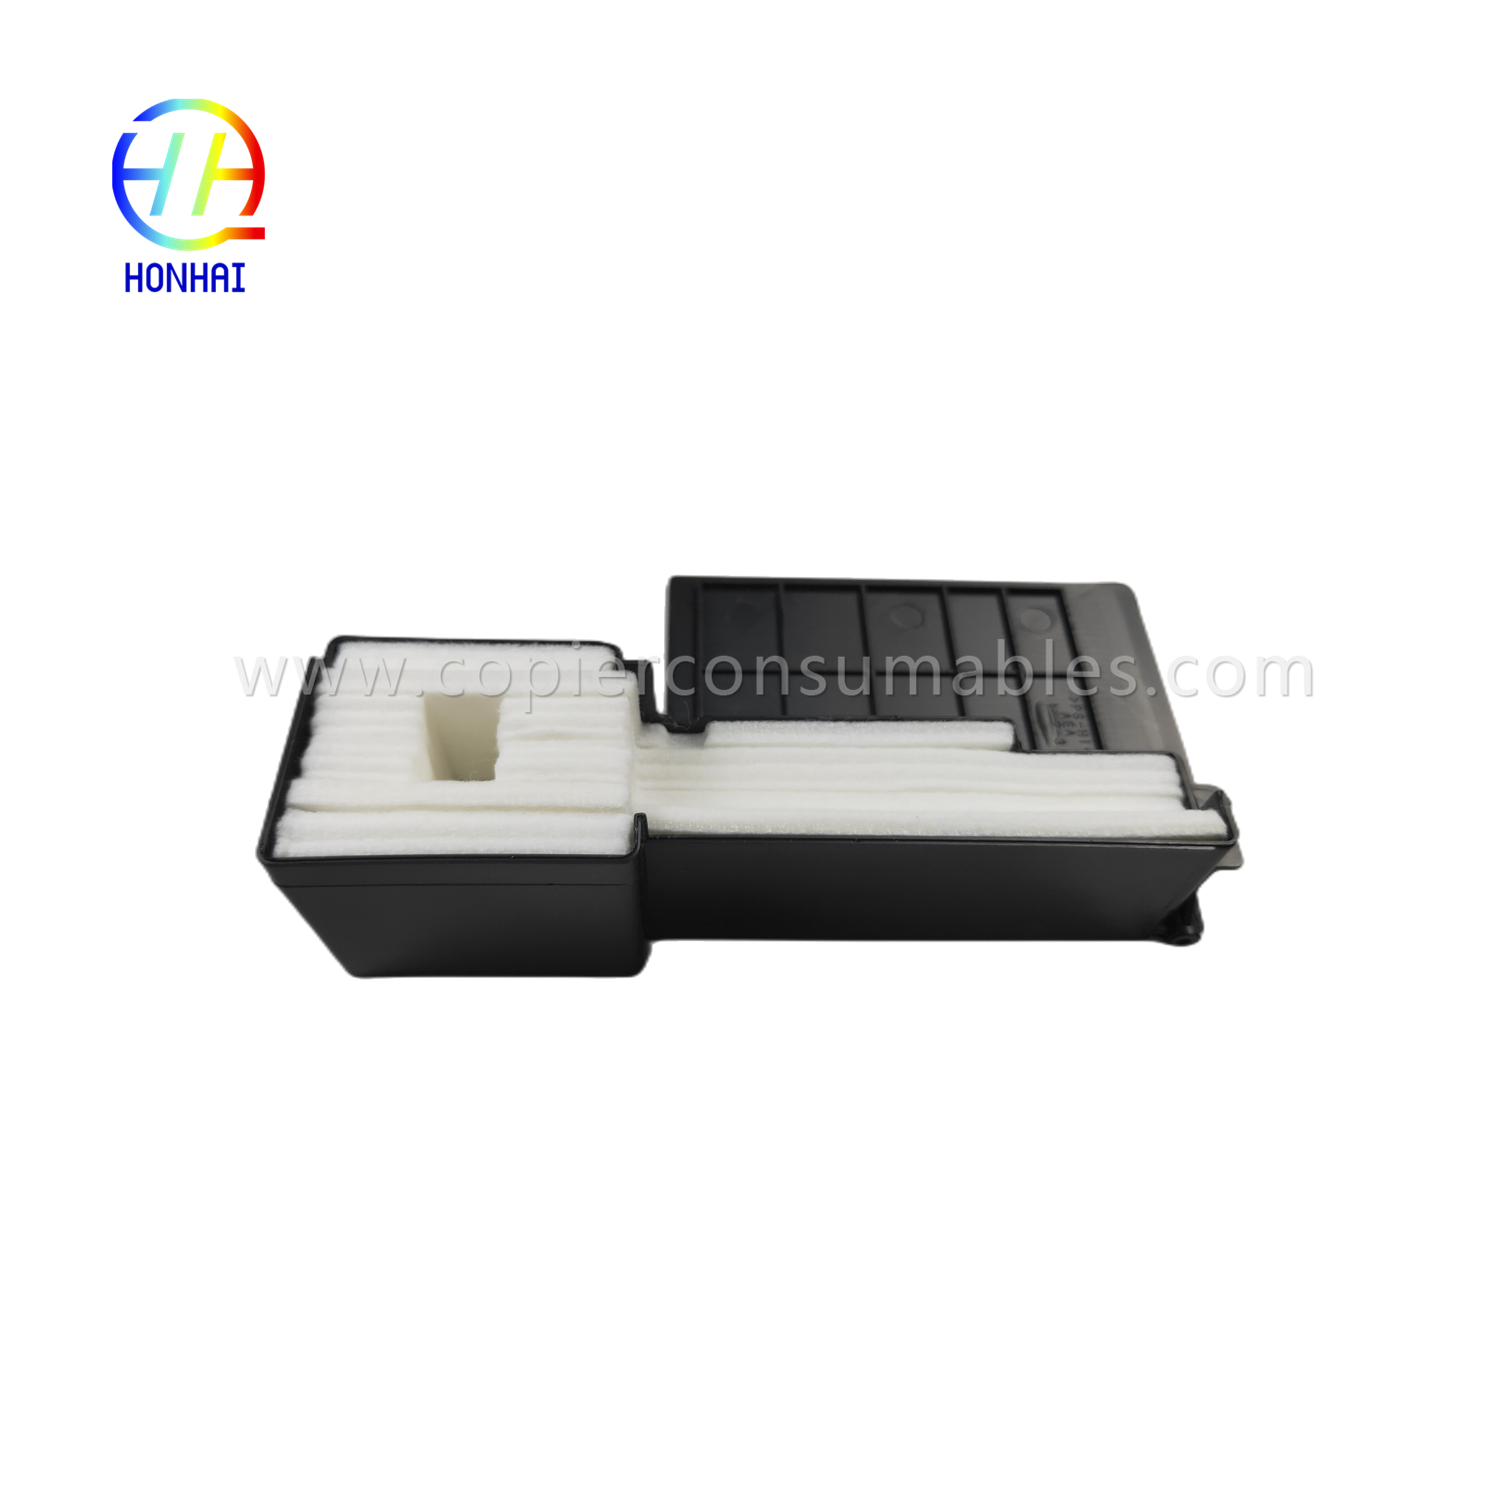 https://c585.goodao.net/waste-ink-pad-pack-forl220-l360-l380-printer-product/